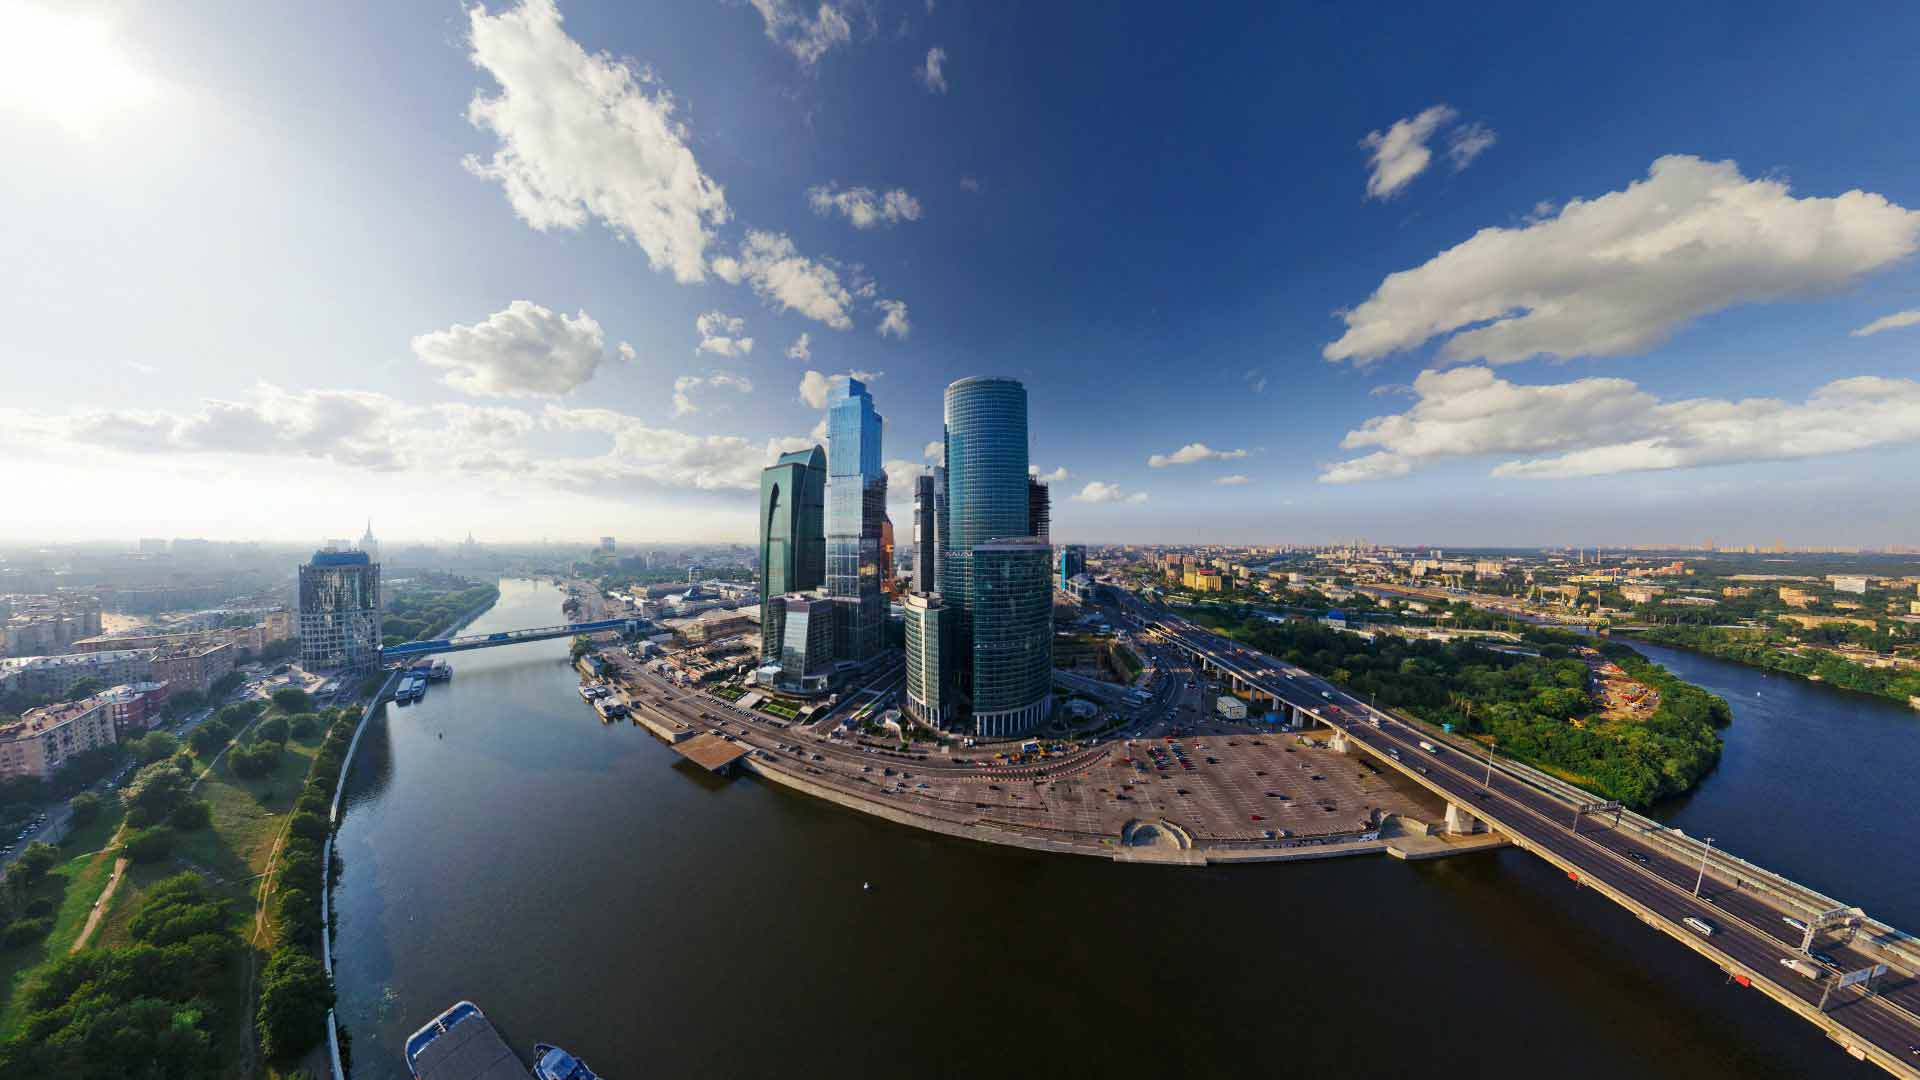 Amazing view of moscow wallpapers and images - wallpapers